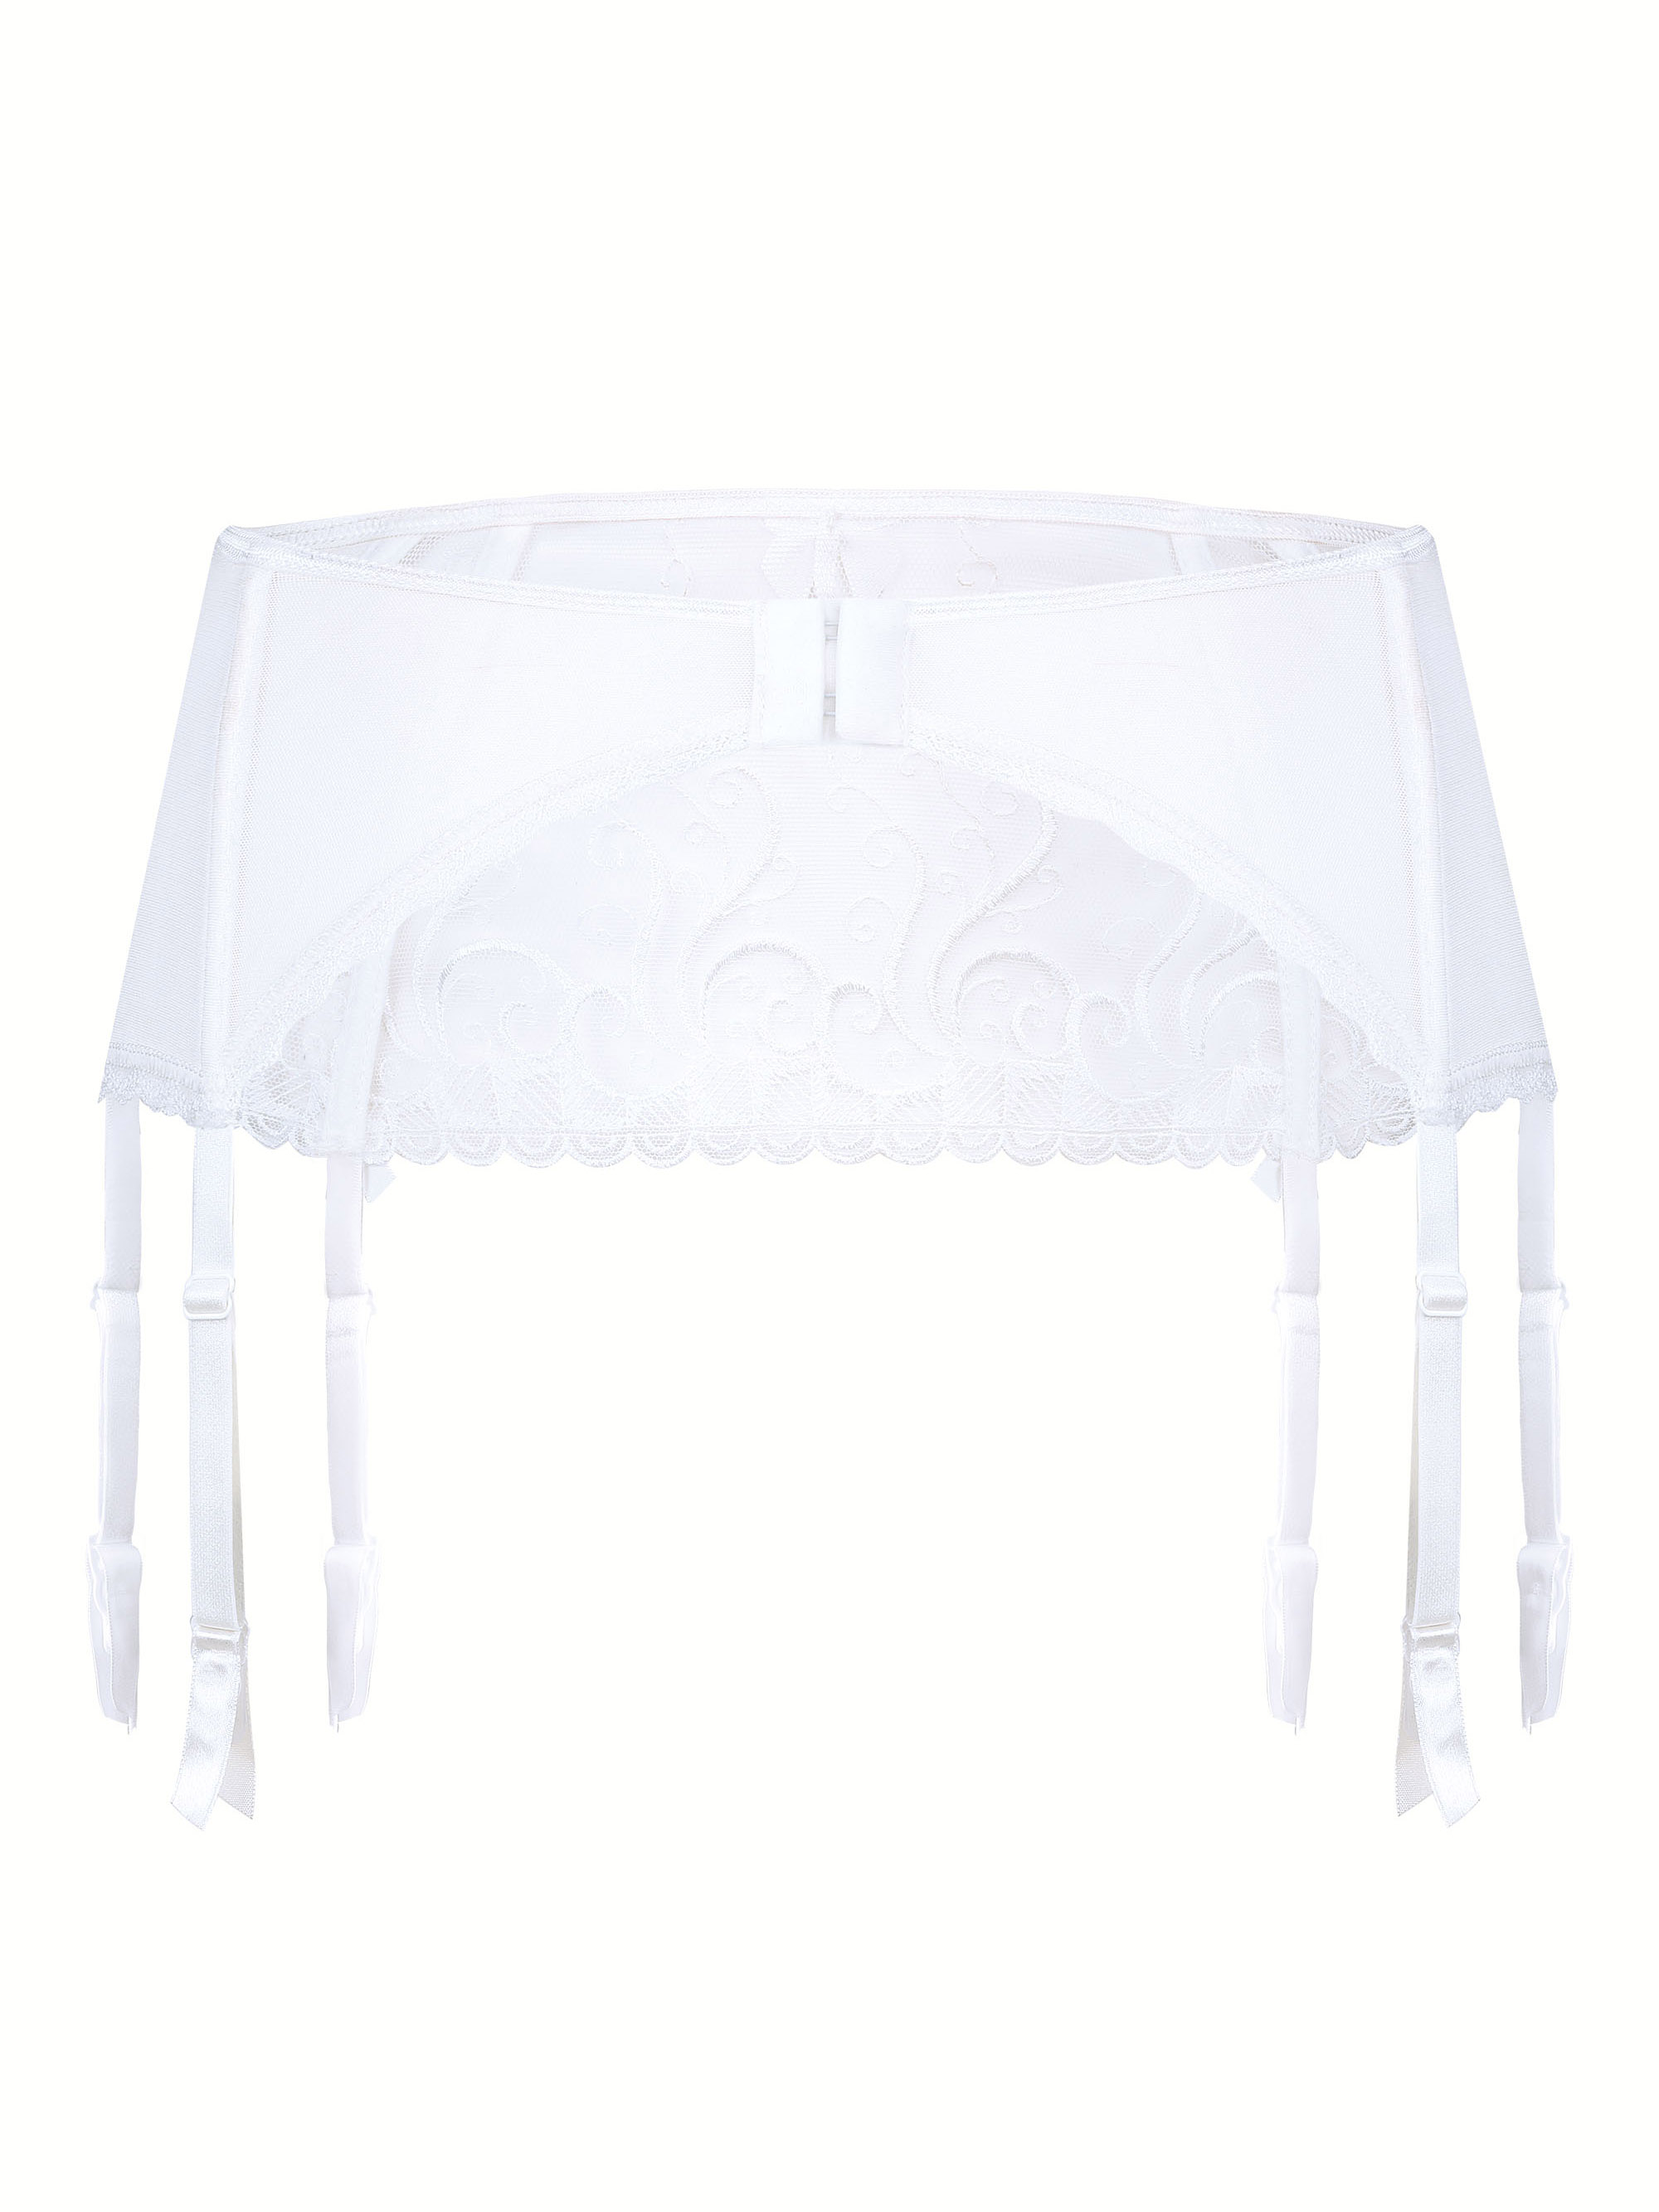 Lace garter belt with sheer tulle Roza Anuk #7